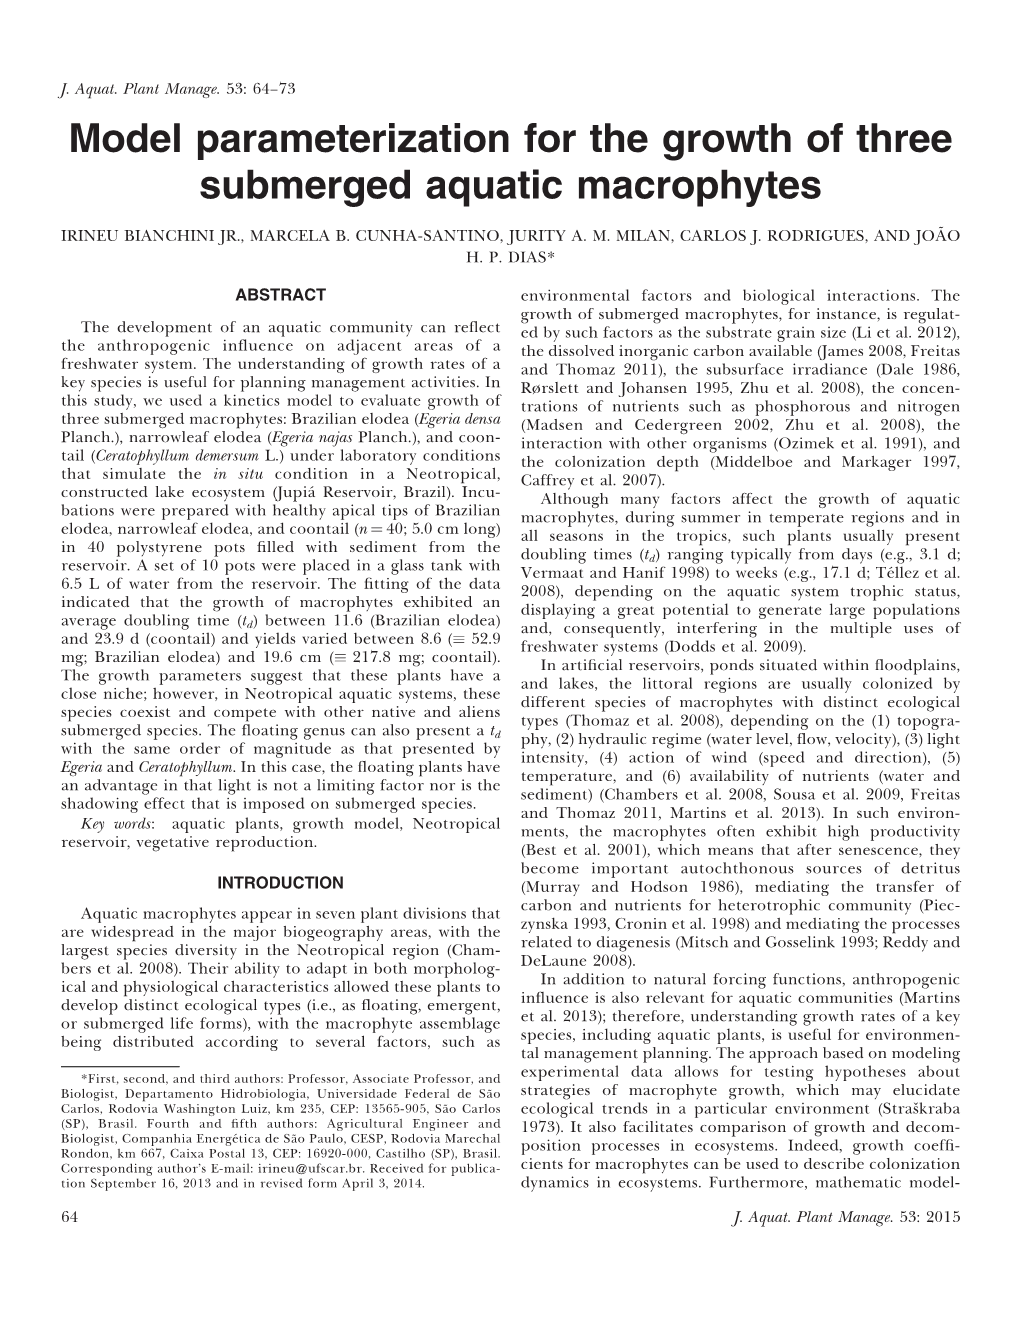 Model Parameterization for the Growth of Three Submerged Aquatic Macrophytes